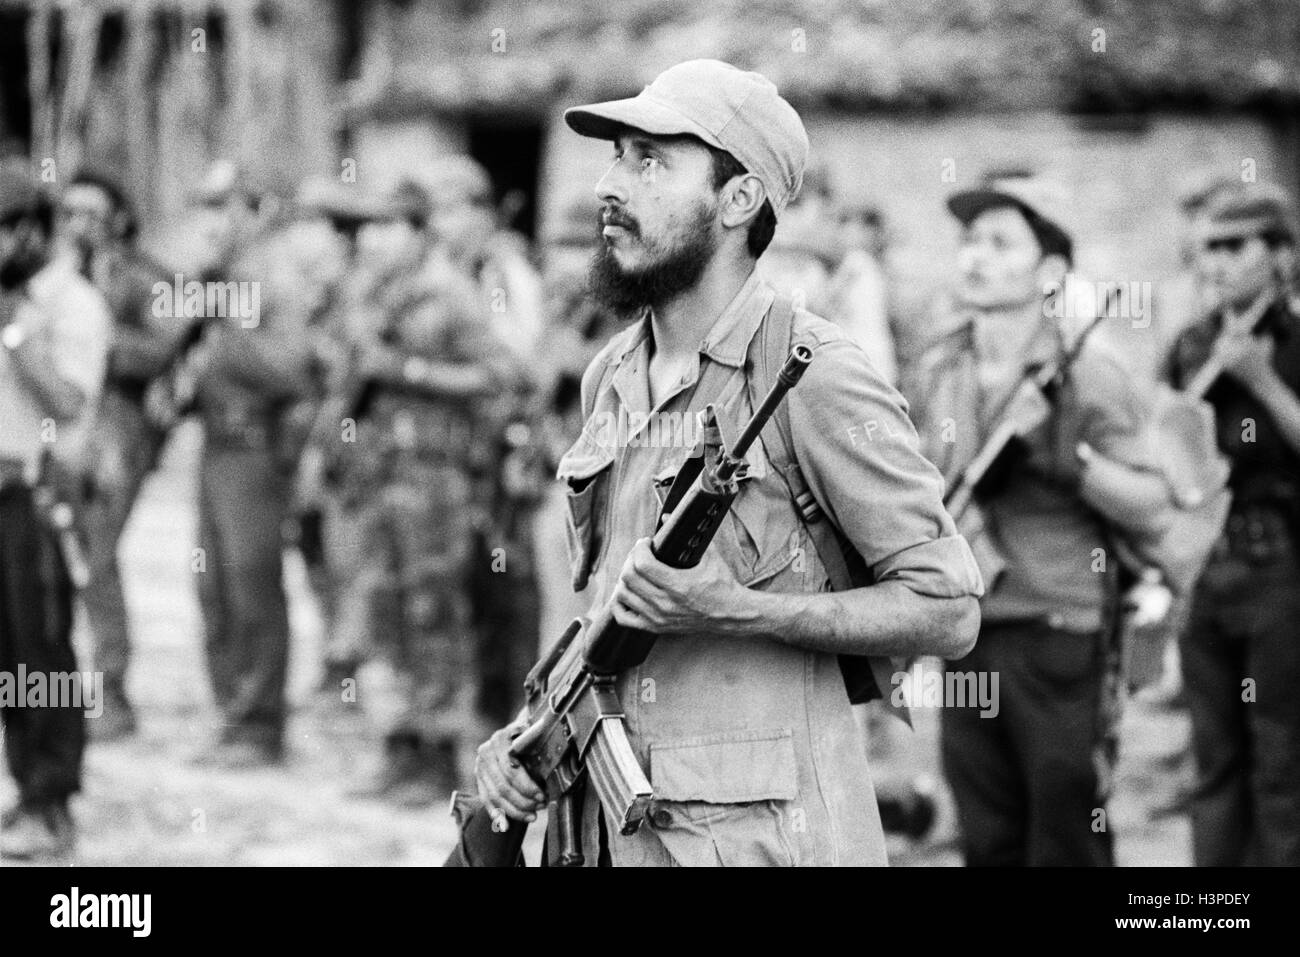 CHALATENANGO,  EL SALVADOR, FEB 1984: - Within the FPL Guerrilla's Zones of Control - Comandante Douglas speaks to some of the guerrillas that had been gathered for an offensive. Stock Photo